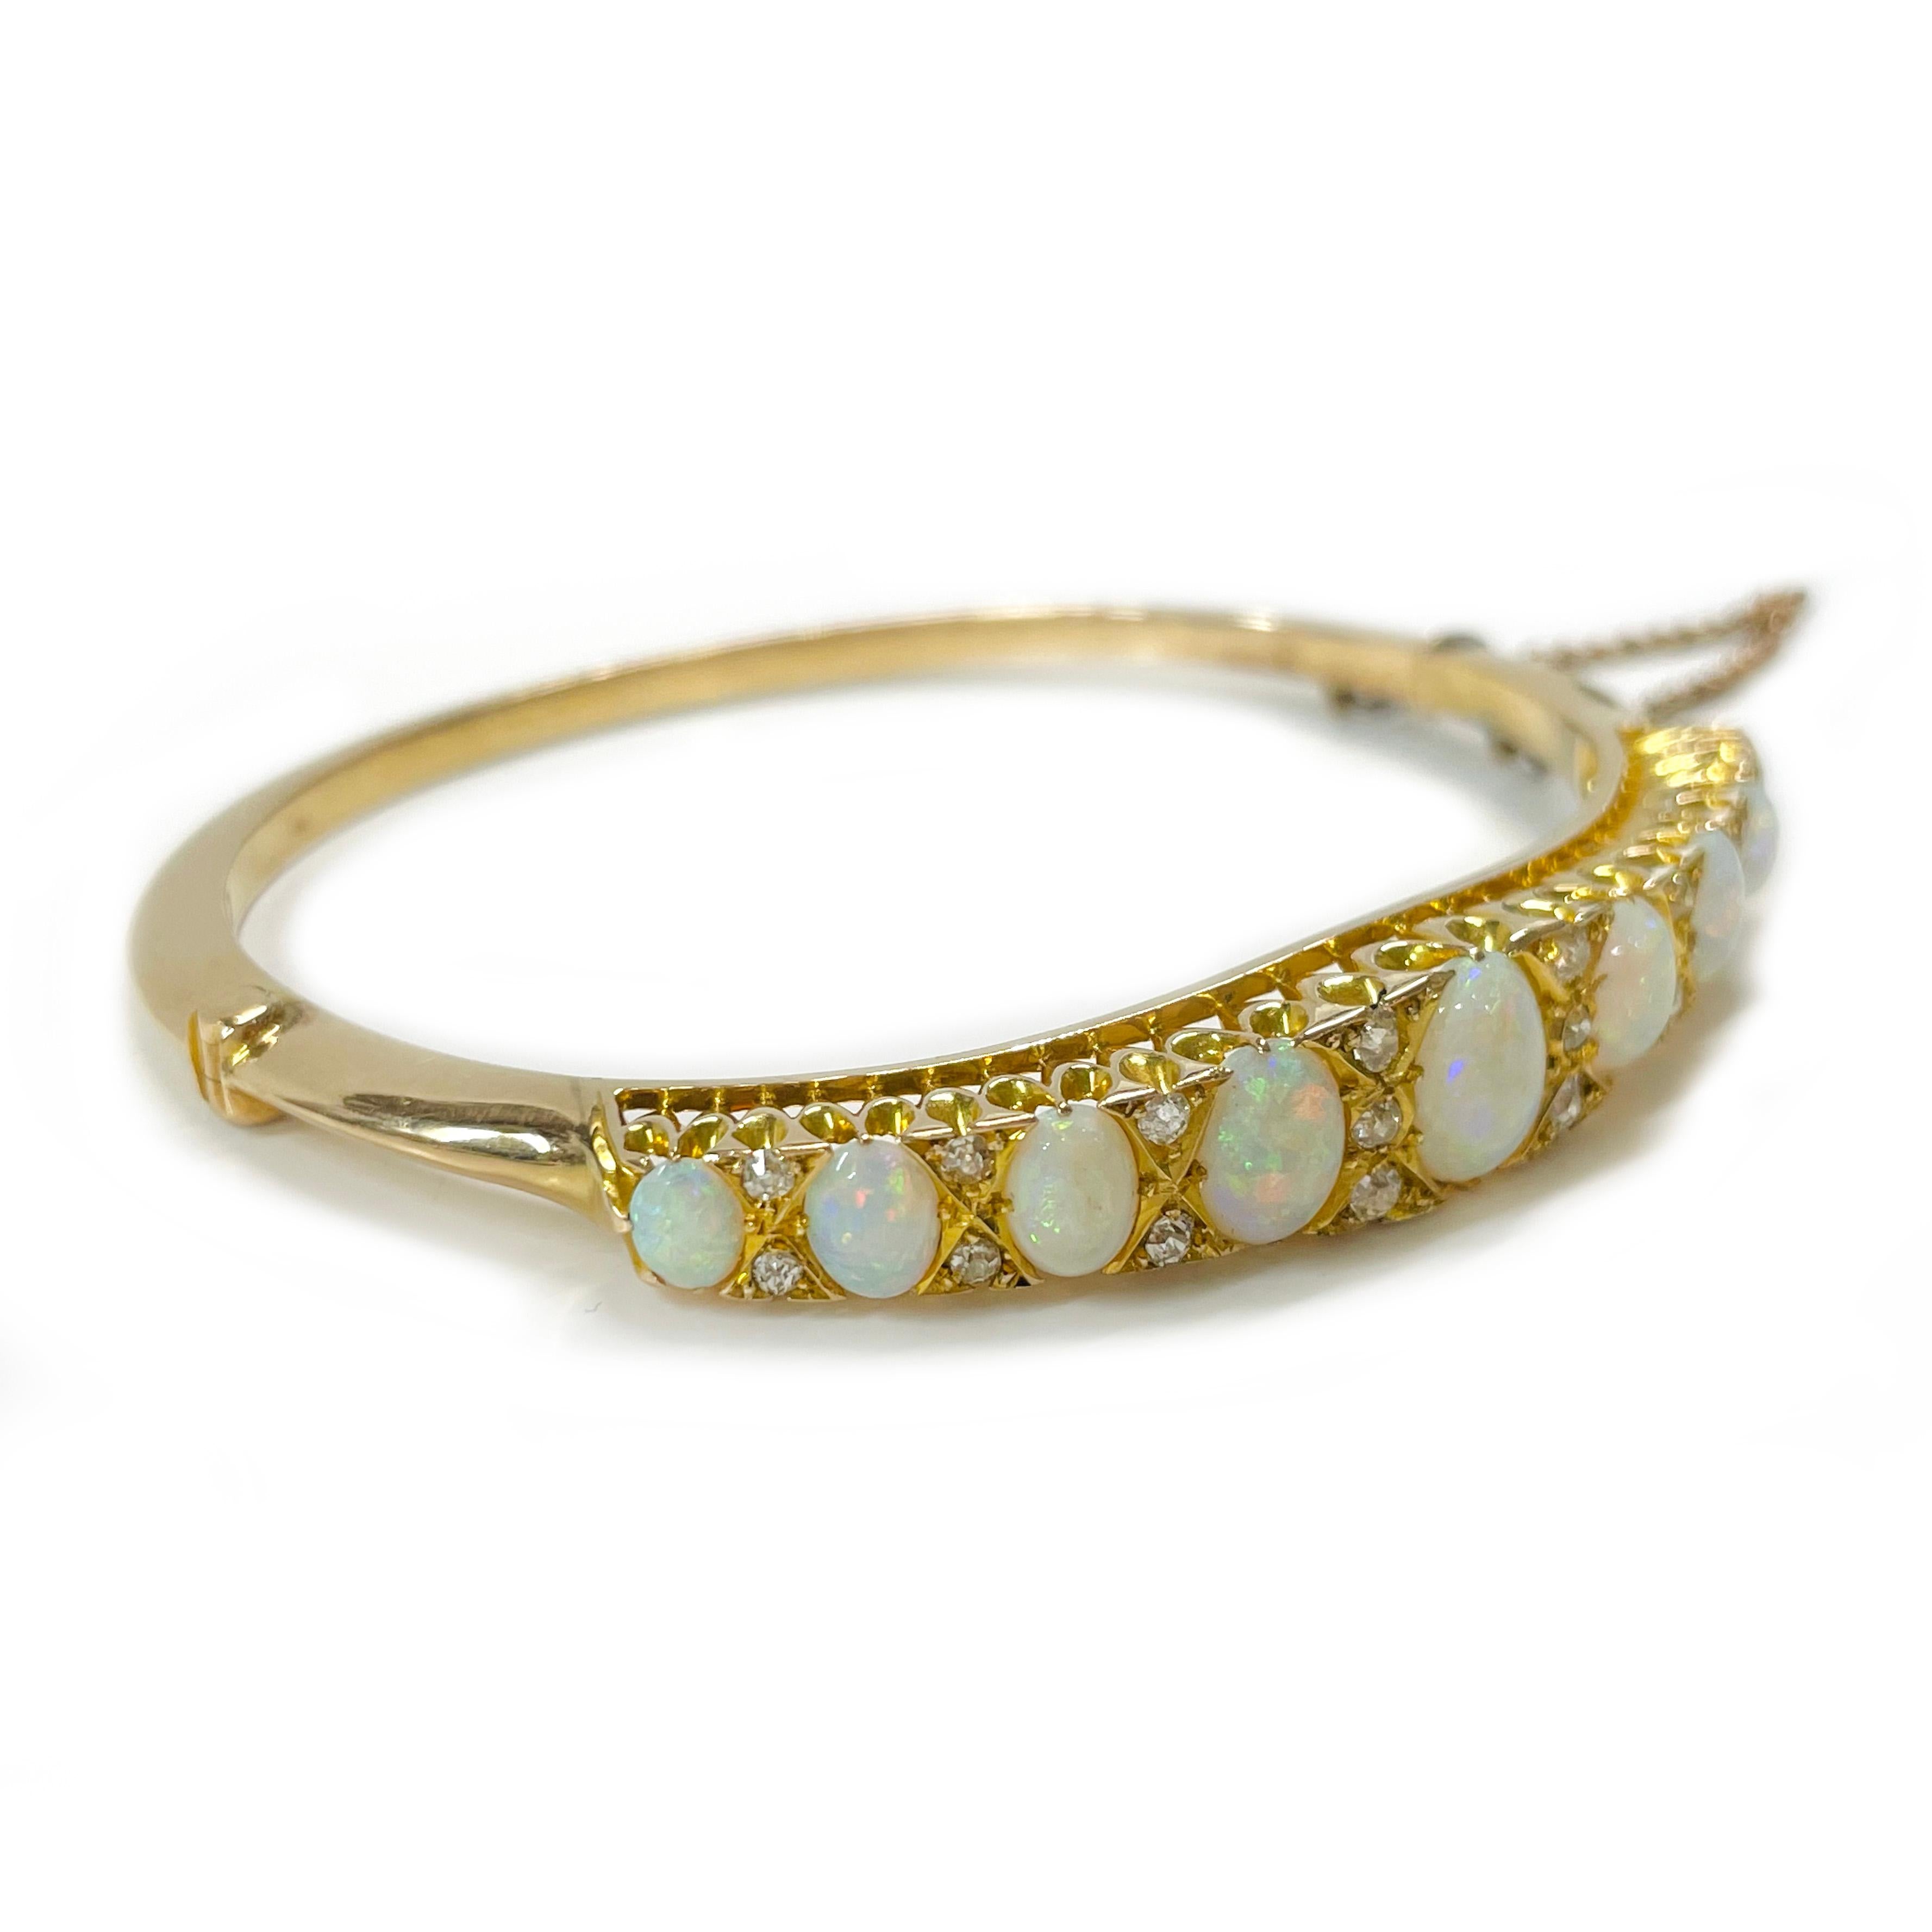 Tested 18 Karat Yellow Gold Opal Diamond Hinged Bangle Bracelet. Nine prong-set Opals and eighteen euro-cut diamonds adorn this lovely bangle bracelet. The carat total weight of the AA quality Opals is 3.66ctw. The white Opals have a play of color